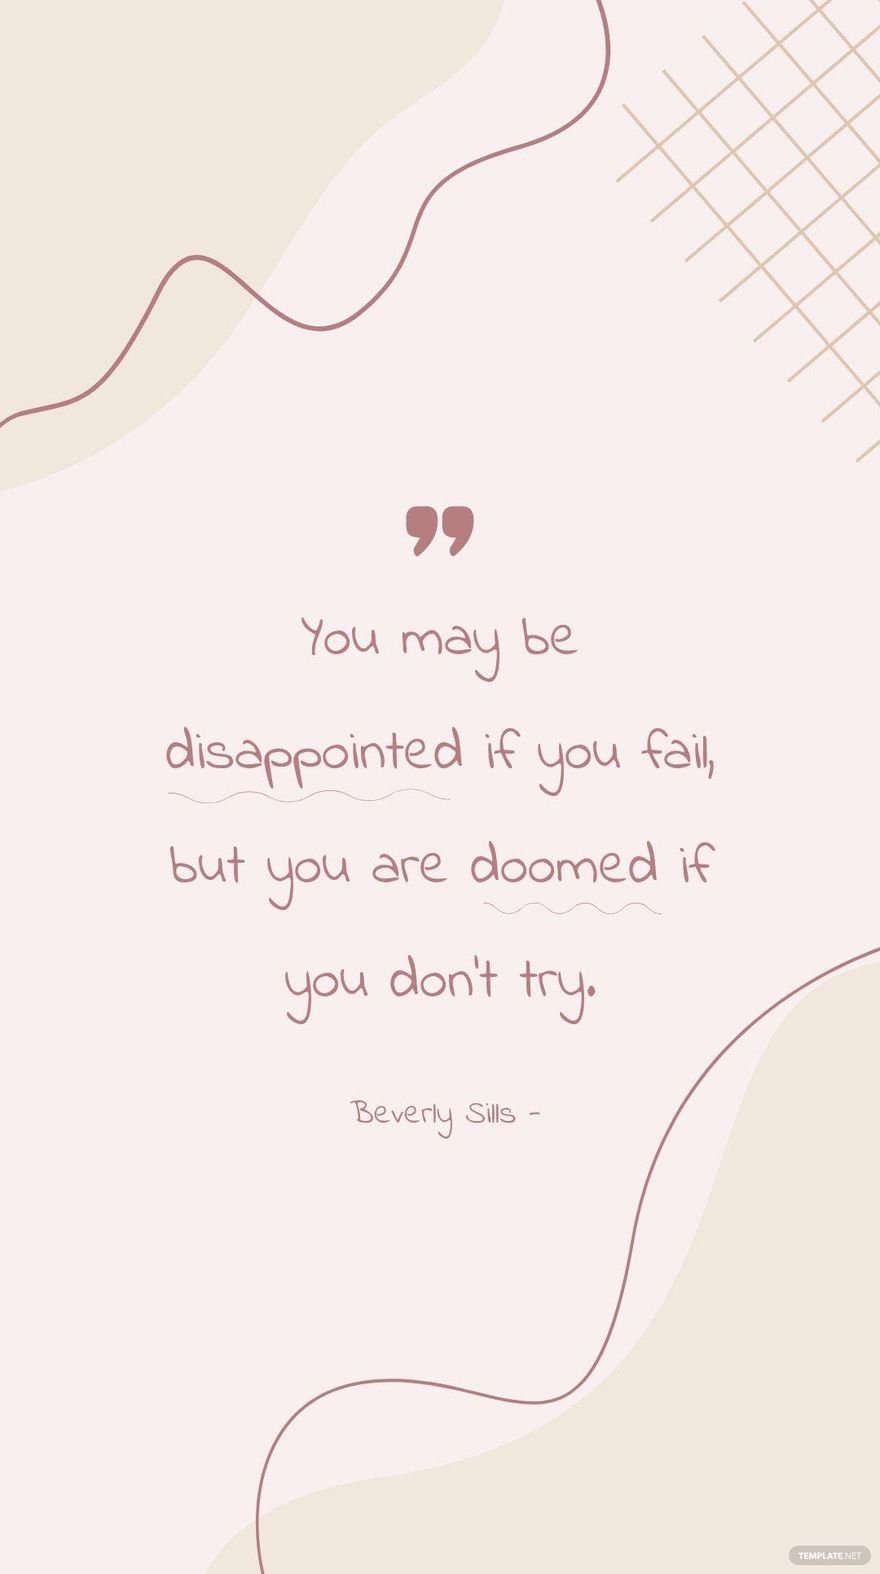 Beverly Sills - You may be disappointed if you fail, but you are doomed if you don’t try.